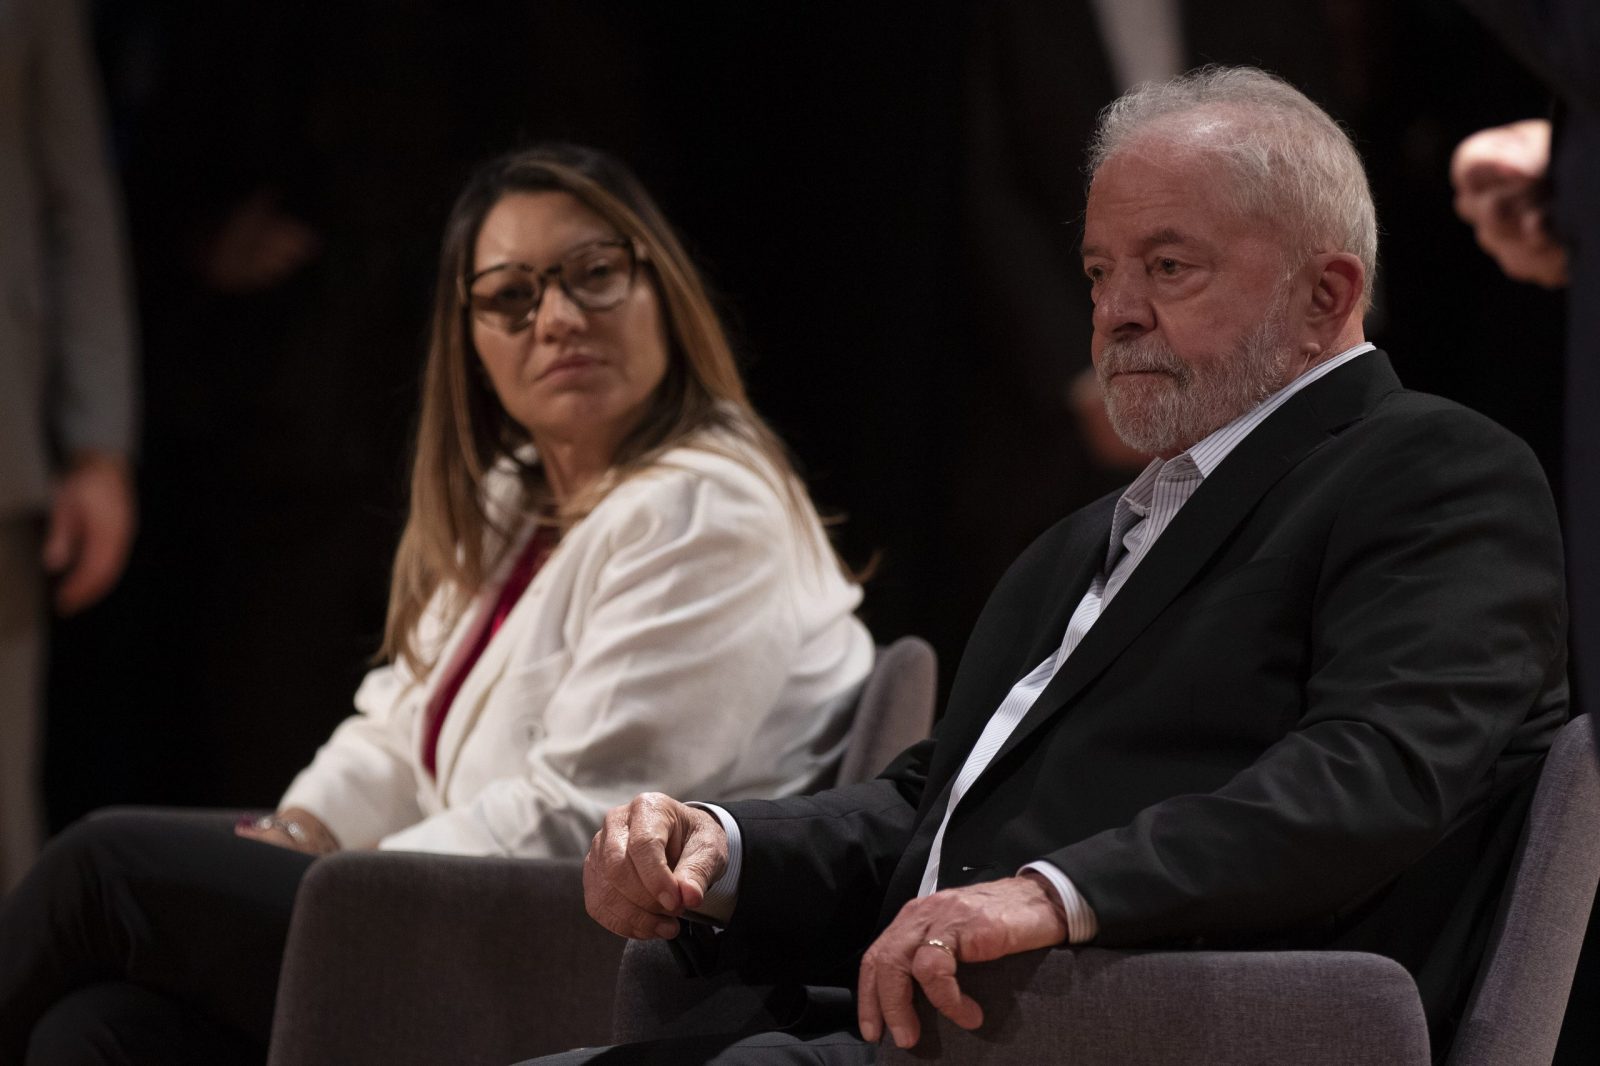 epa10298587 The elected president, Luiz Inacio Lula da Silva (R) and the first lady, Rosangela da Silva, popularly known as Janja (L), made statements when meeting with allied politicians at the Banco do Brasil Cultural Center (CCBB) in Brasilia, Brazil, 10 November 2022. Lula da Silva was moved when he affirmed that he 'never' thought that hunger would return to the country and affirmed that his 'mission will be accomplished' if 'every citizen returns to breakfast, lunch and dinner' every day. 'Excuse me', he said, interrupting his speech at a meeting with parliamentarians with his eyes full of tears, and remembering that he made that promise that all Brazilians can eat every day two decades ago, on 01 January 2003, when he first assumed power.  EPA/Joedson Alves